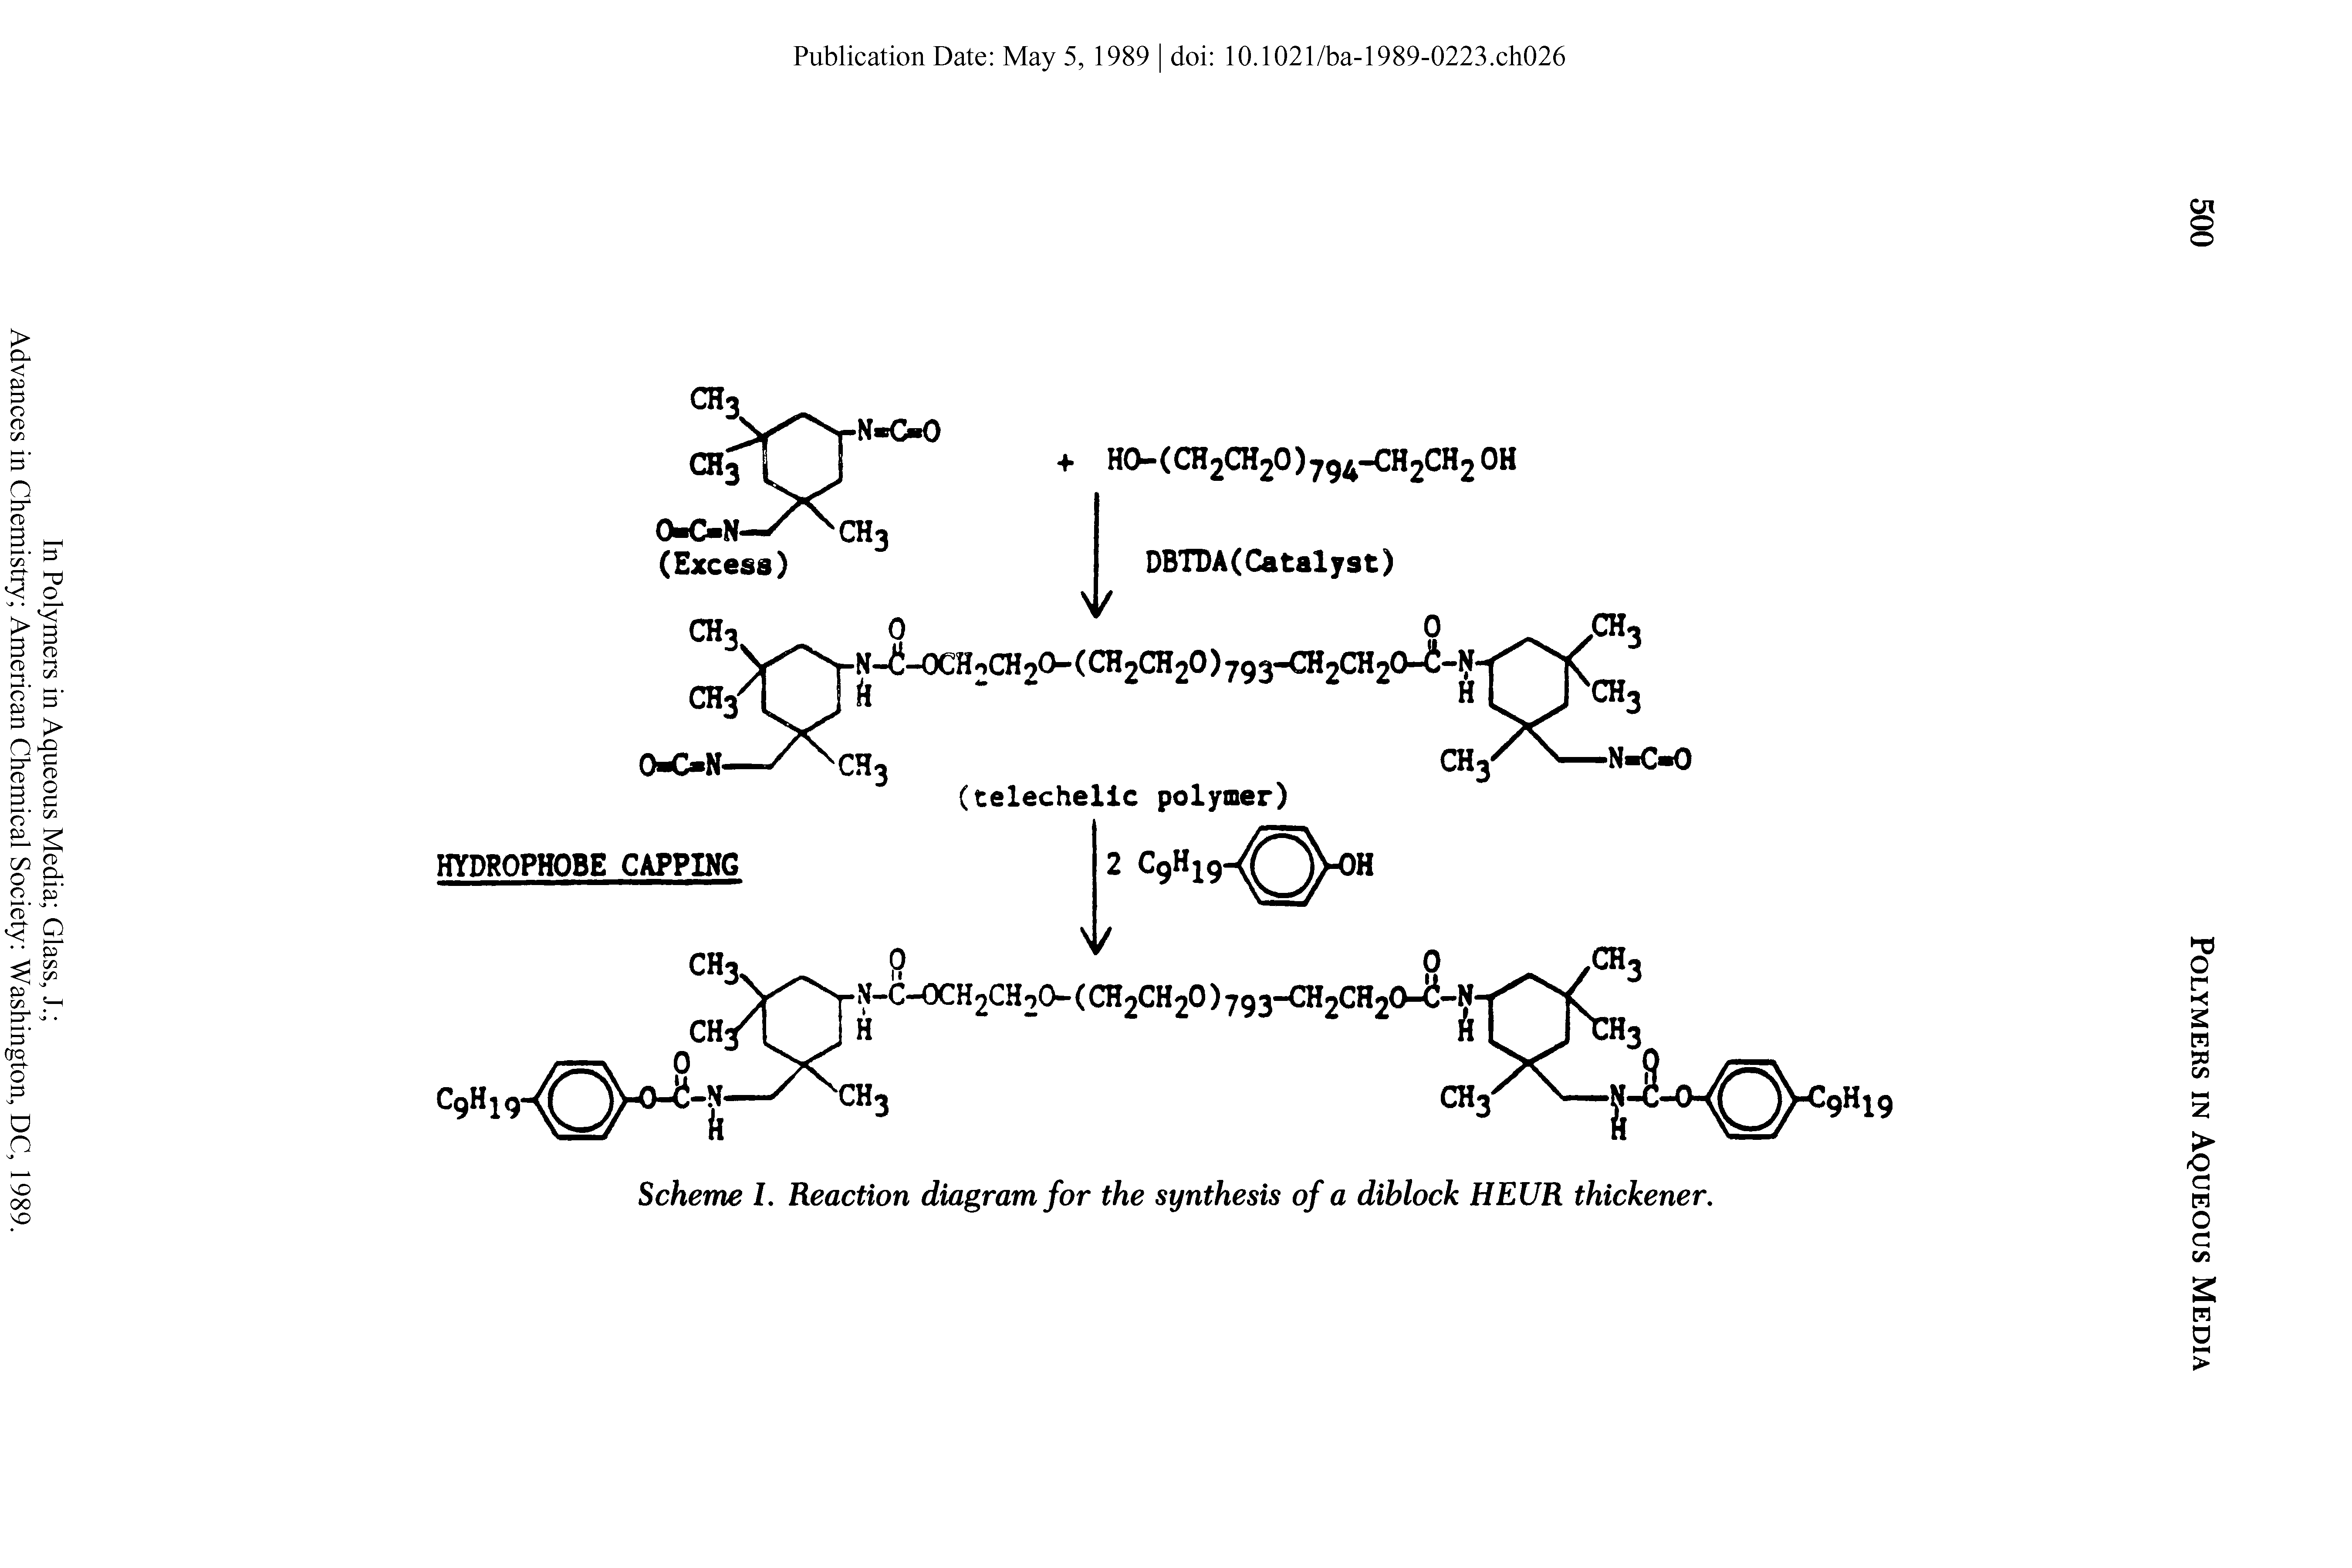 Scheme I. Reaction diagram for the synthesis of a diblock HEUR thickener.